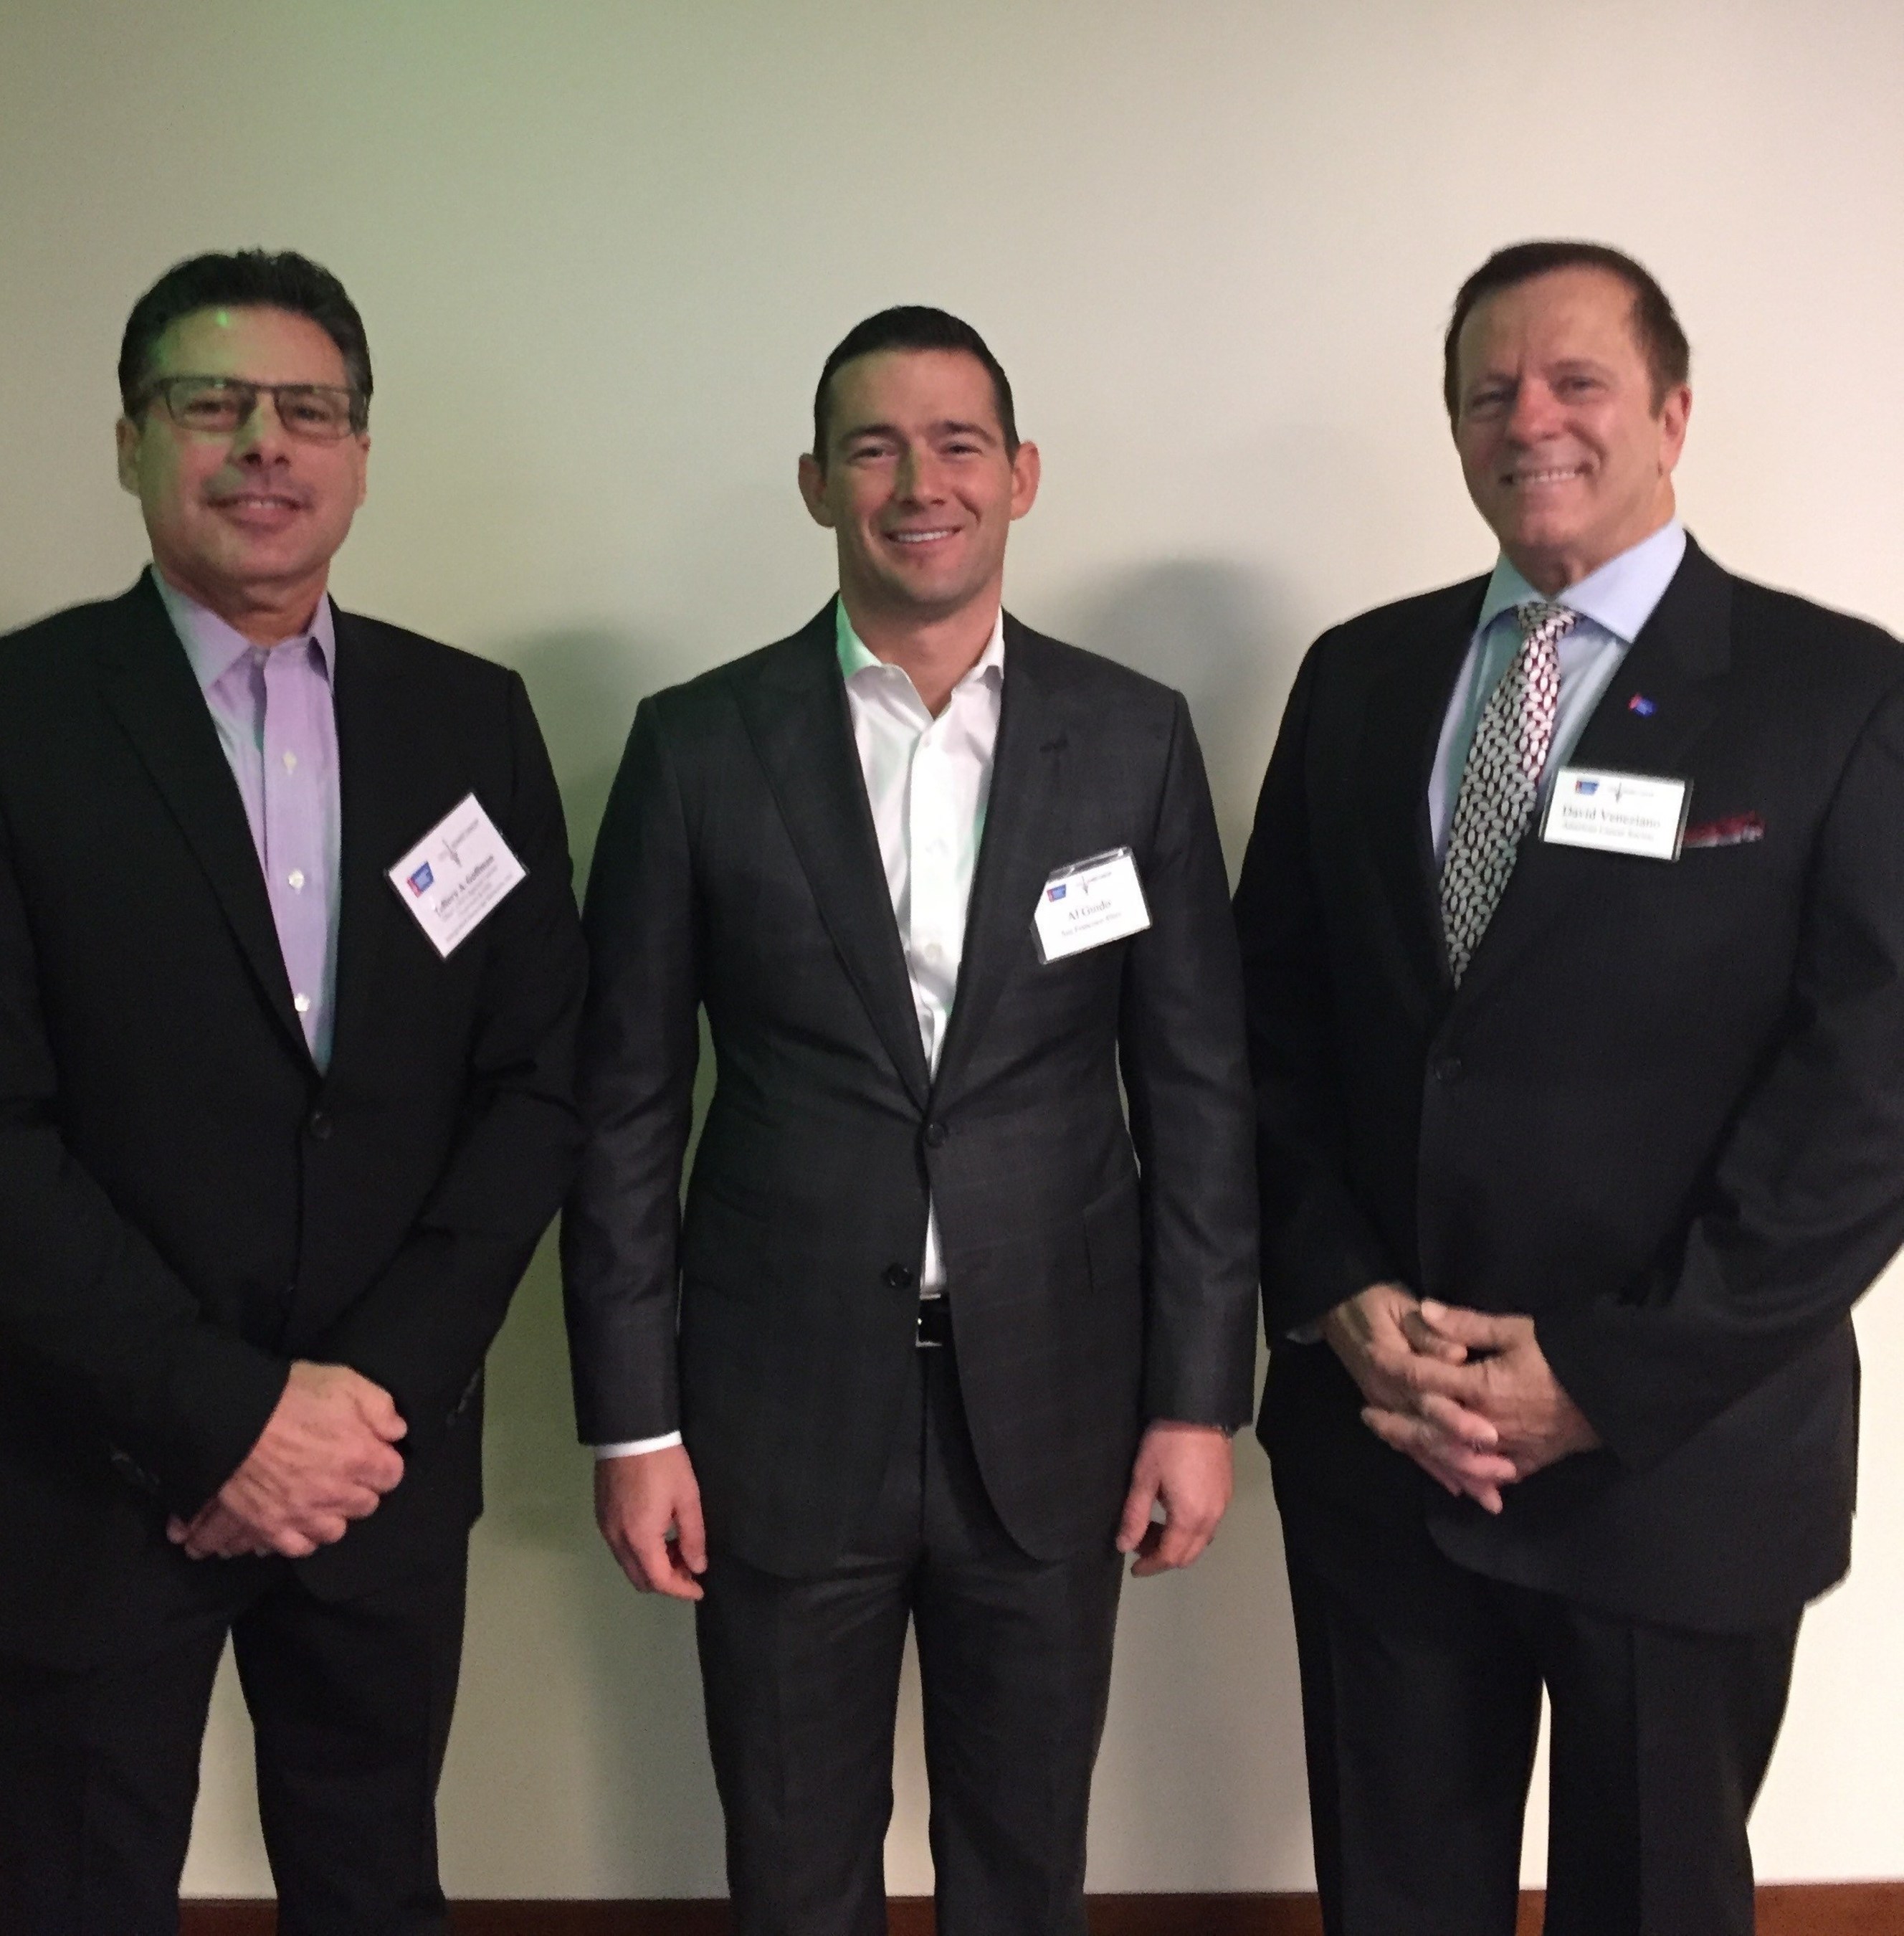 Jeffery Goffman, Al Guido, President of San Francisco 49er's and David Veneziano, EVP American Cancer Society CA Division, at the CEOs Against Cancer meeting in Northern California